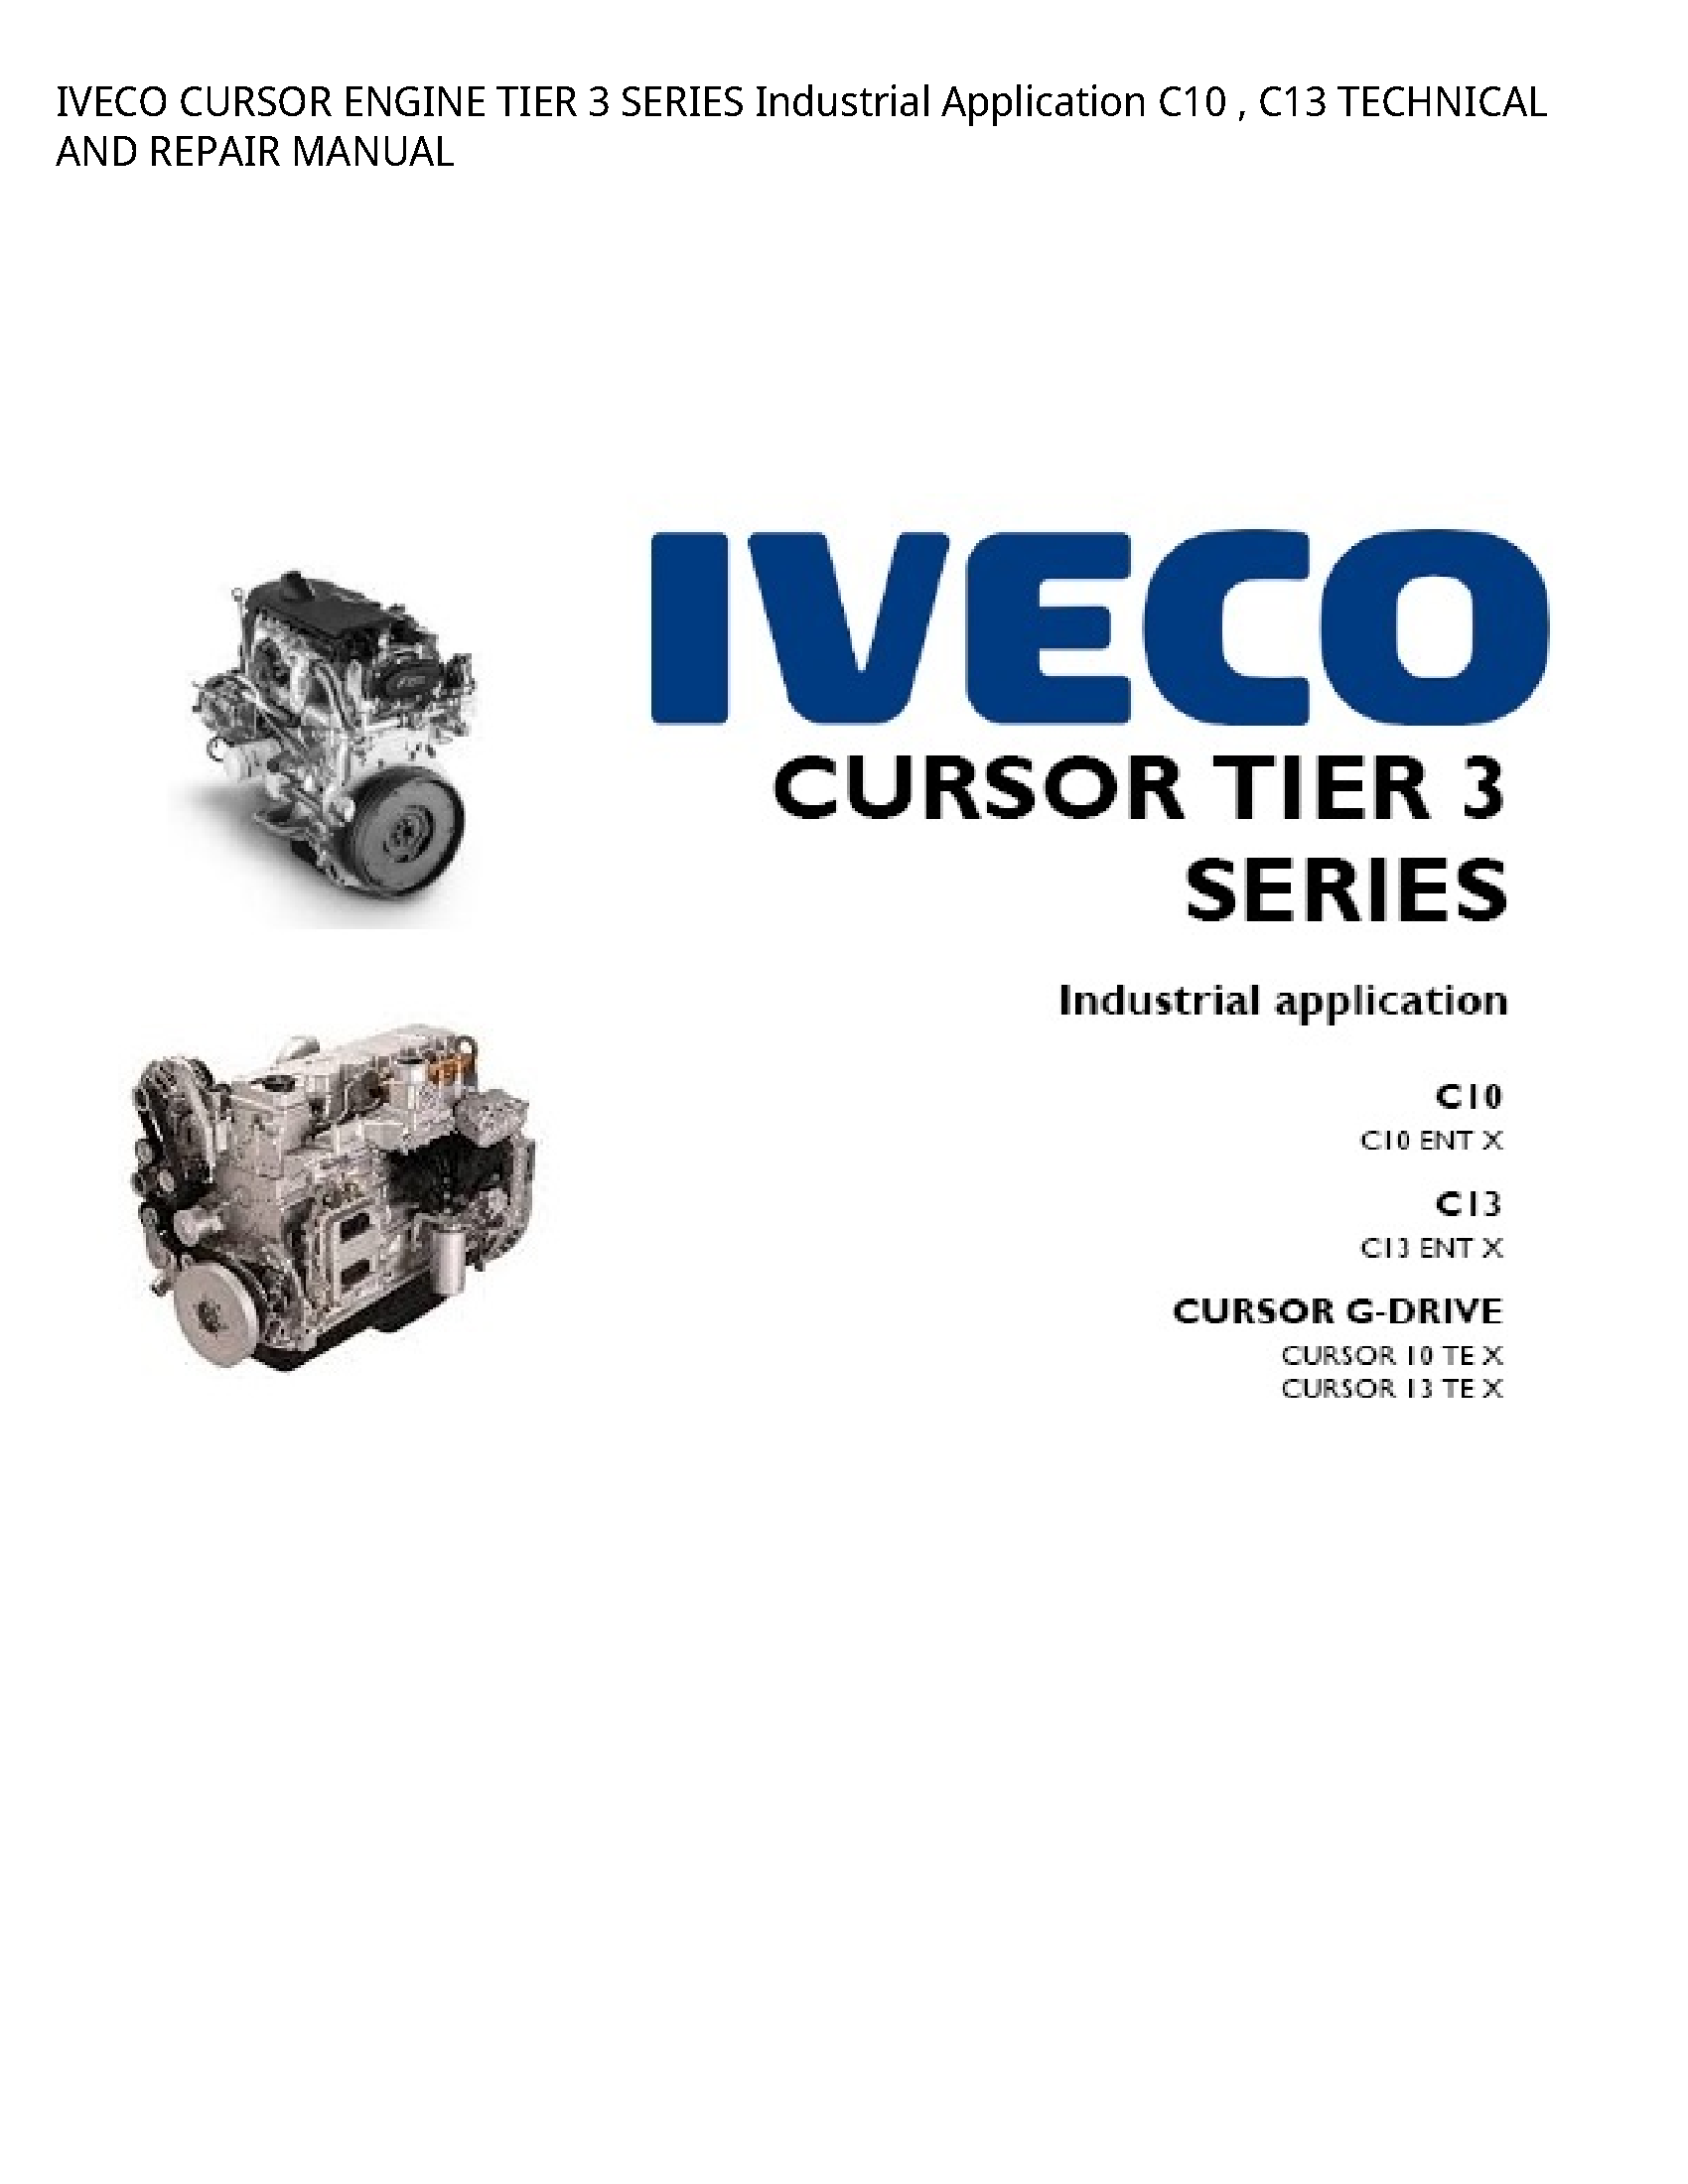 Iveco 3 CURSOR ENGINE TIER SERIES Industrial Application TECHNICAL AND REPAIR manual